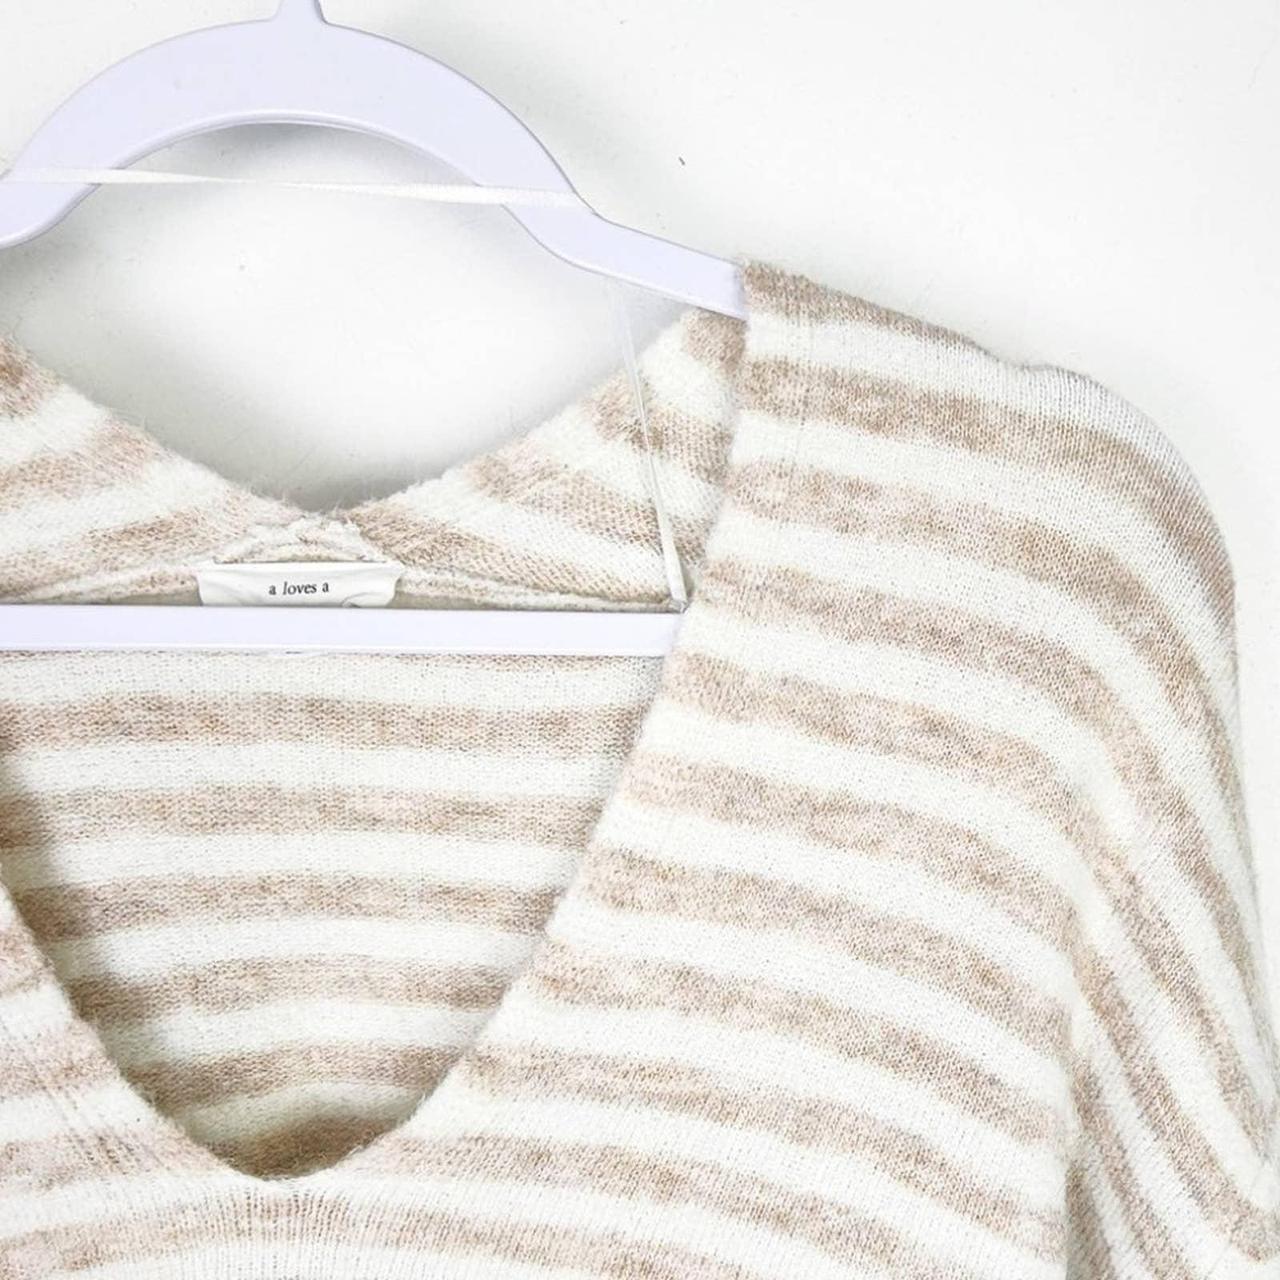 A Loves A Women's White and Tan Jumper (2)